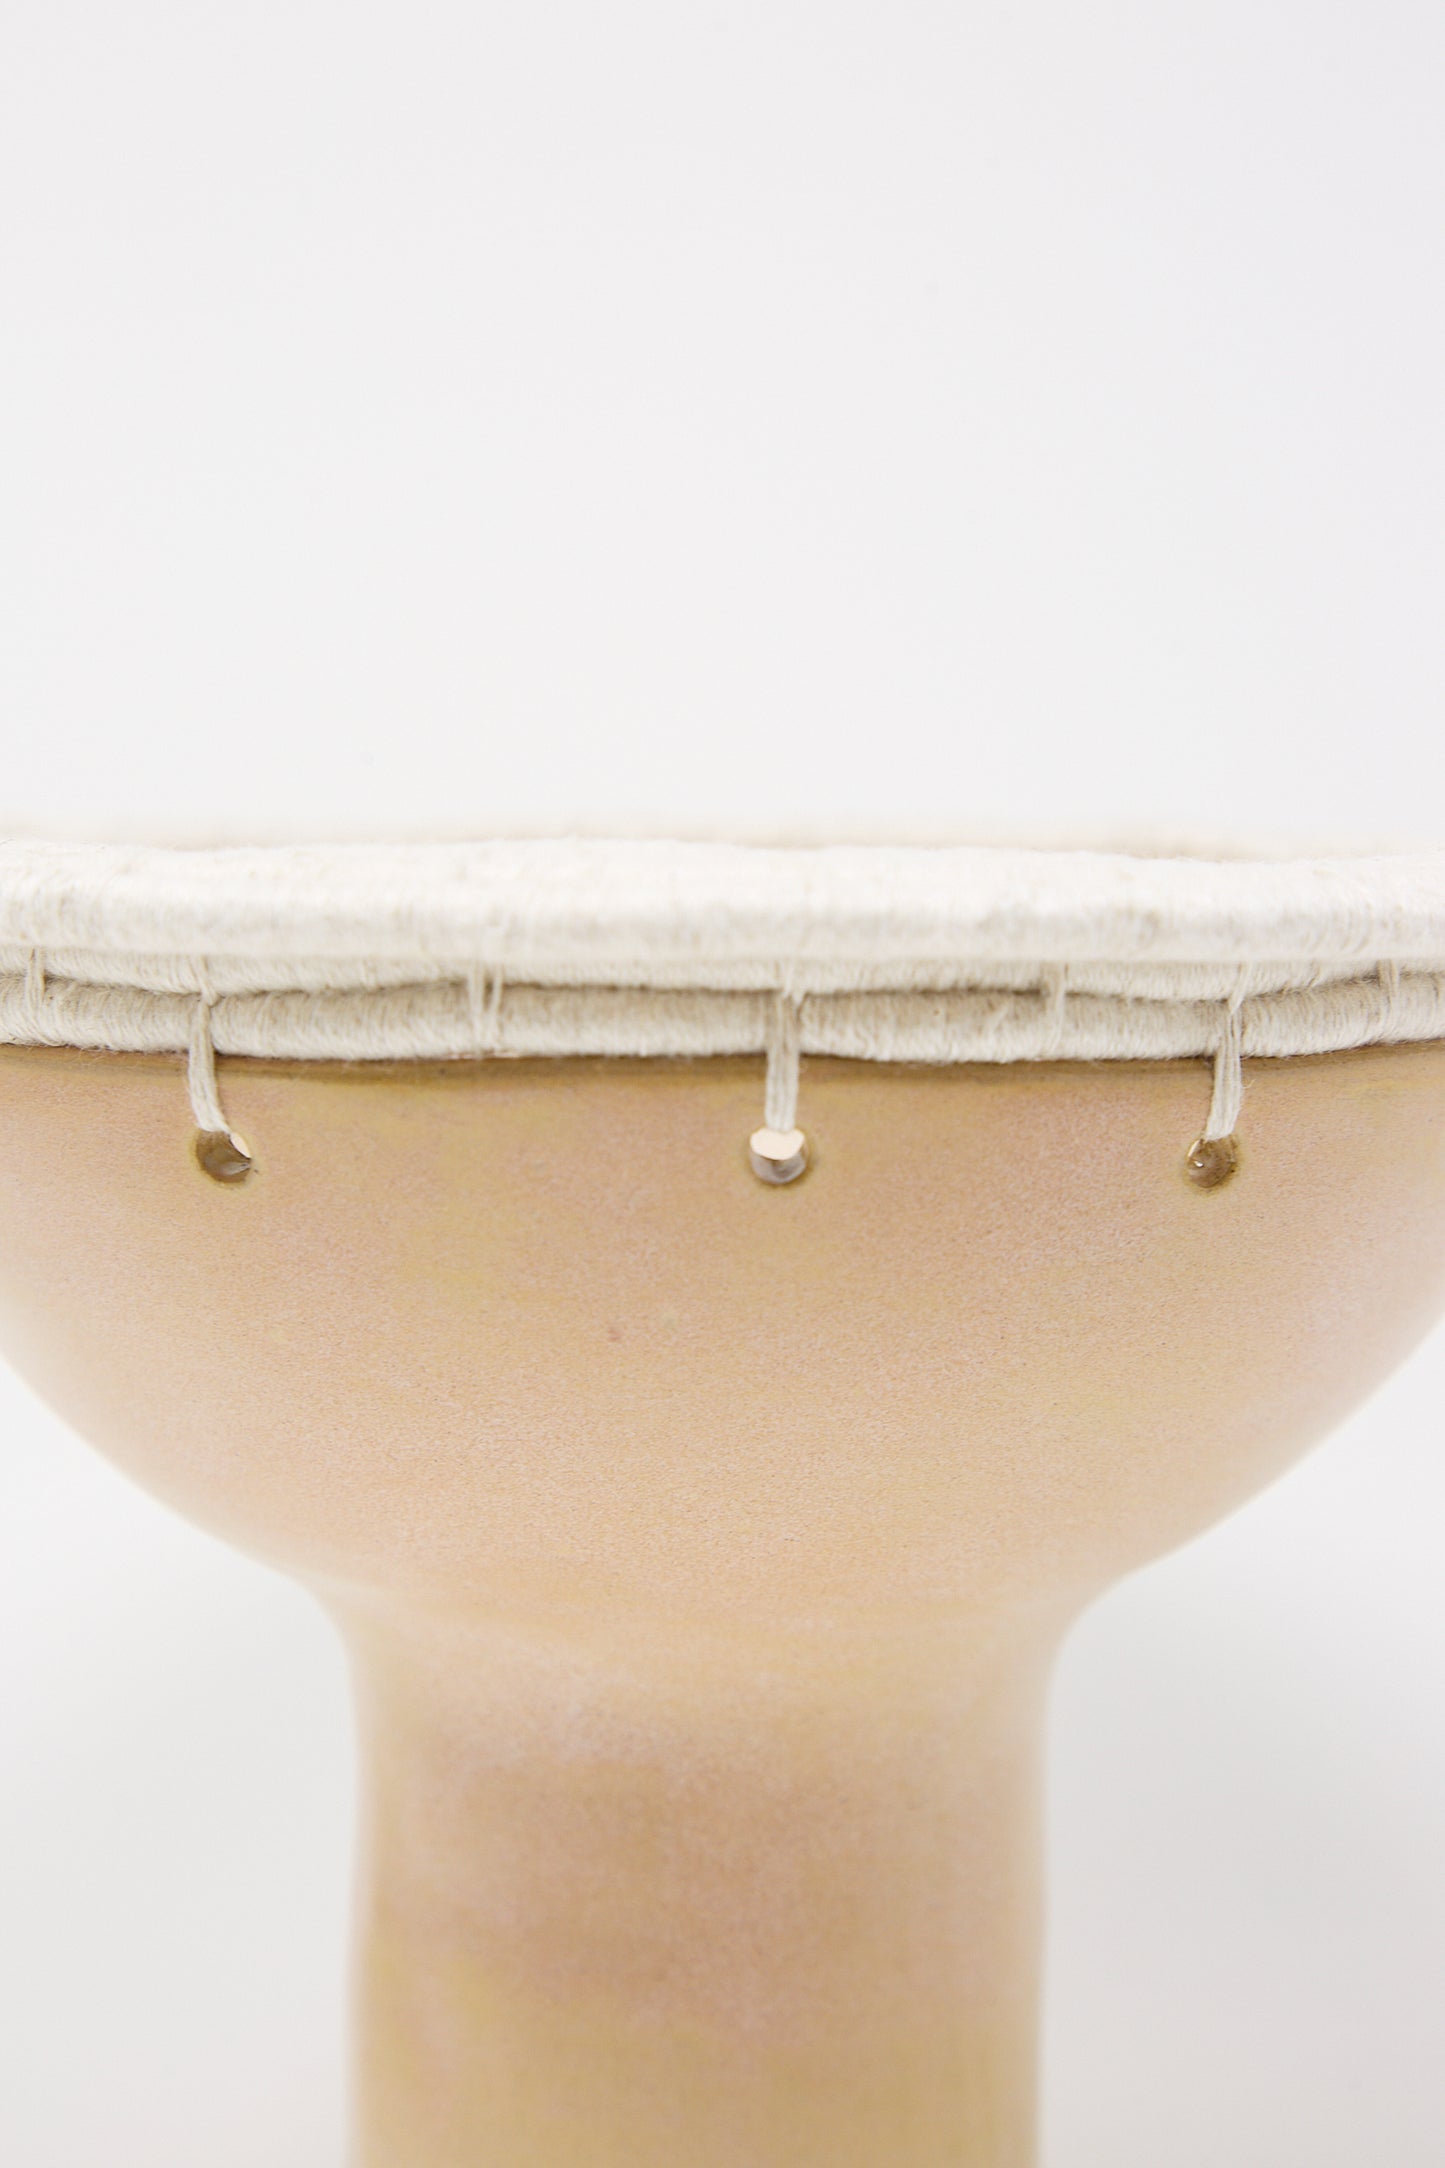 Close-up of a Karen Tinney Decorative Bowl #805 in Tan with tension rods on a white background.